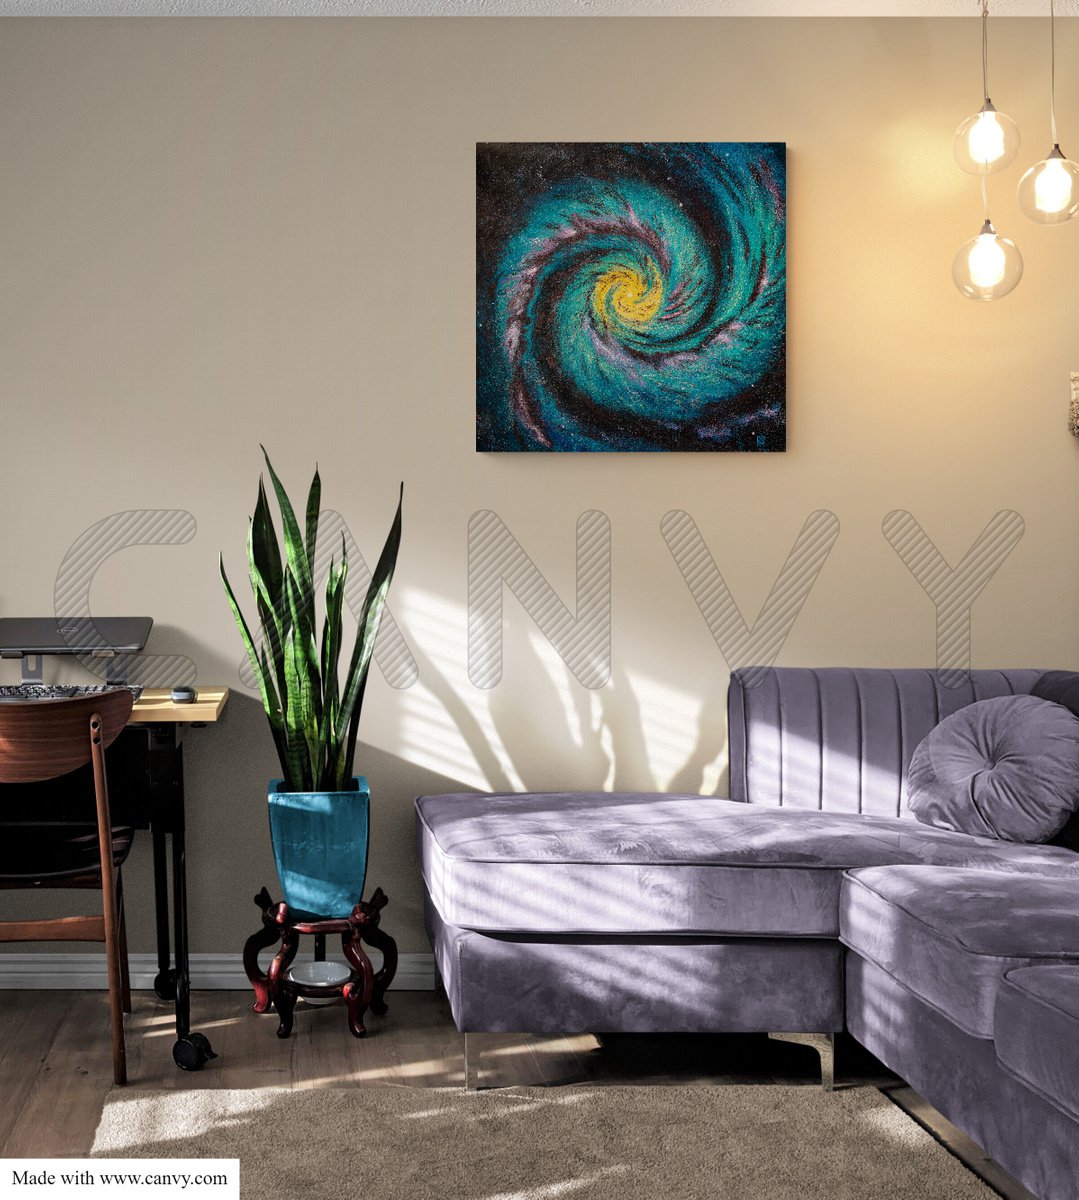 INFINITY - abstract space art, whirlpool, spiral, black hole, round by Rimma Savina